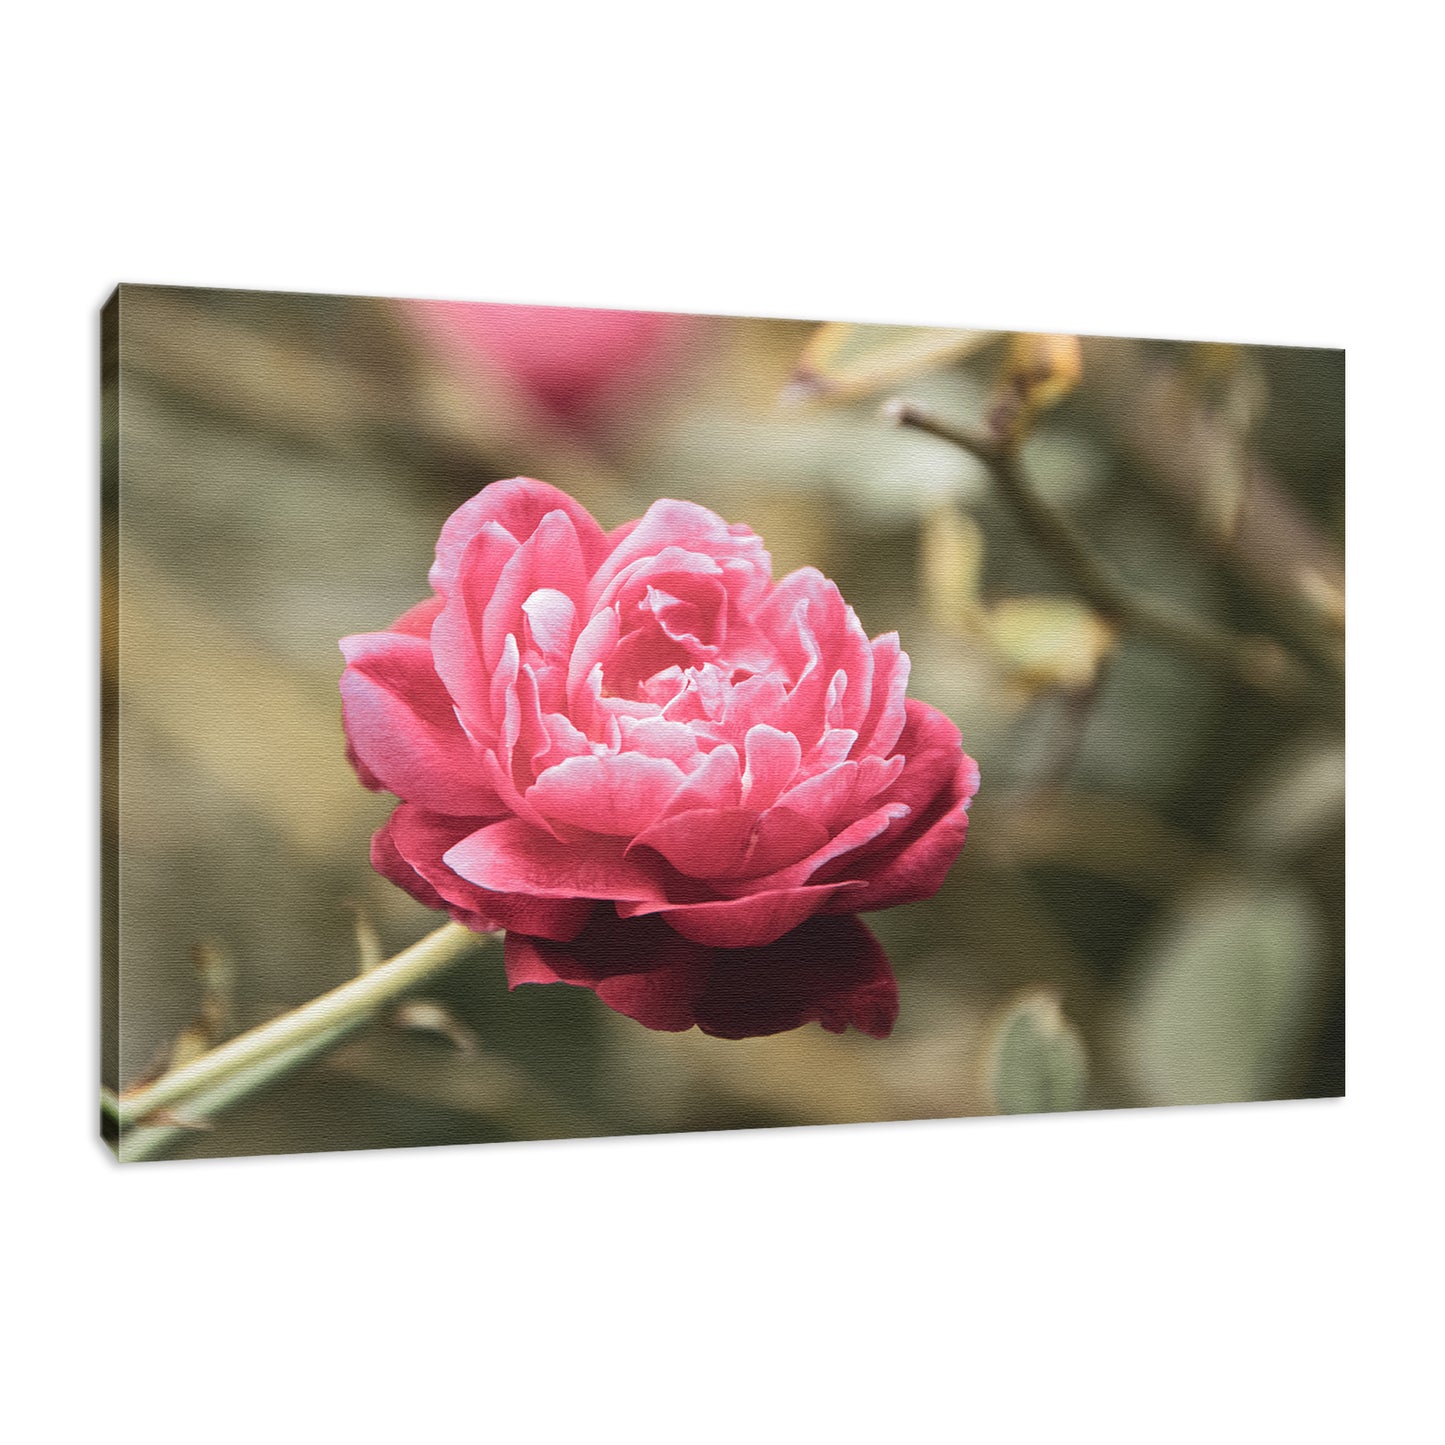 Perfect Petals Colorized Floral Nature Photo Fine Art Canvas Wall Art Prints  - PIPAFINEART